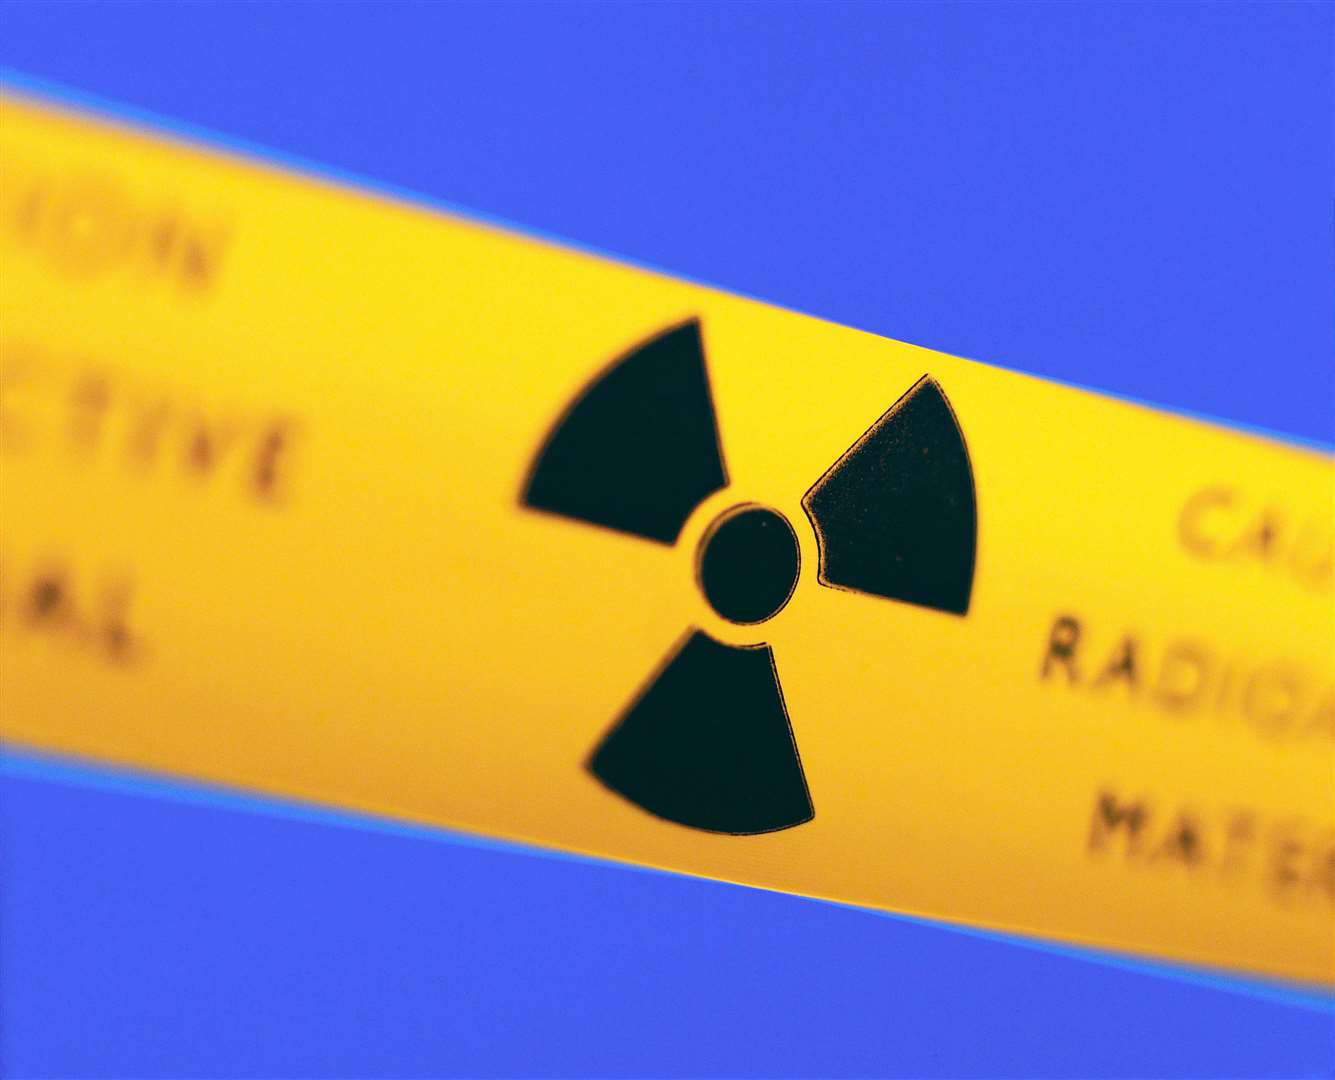 Romney Marsh could host a nuclear waste site